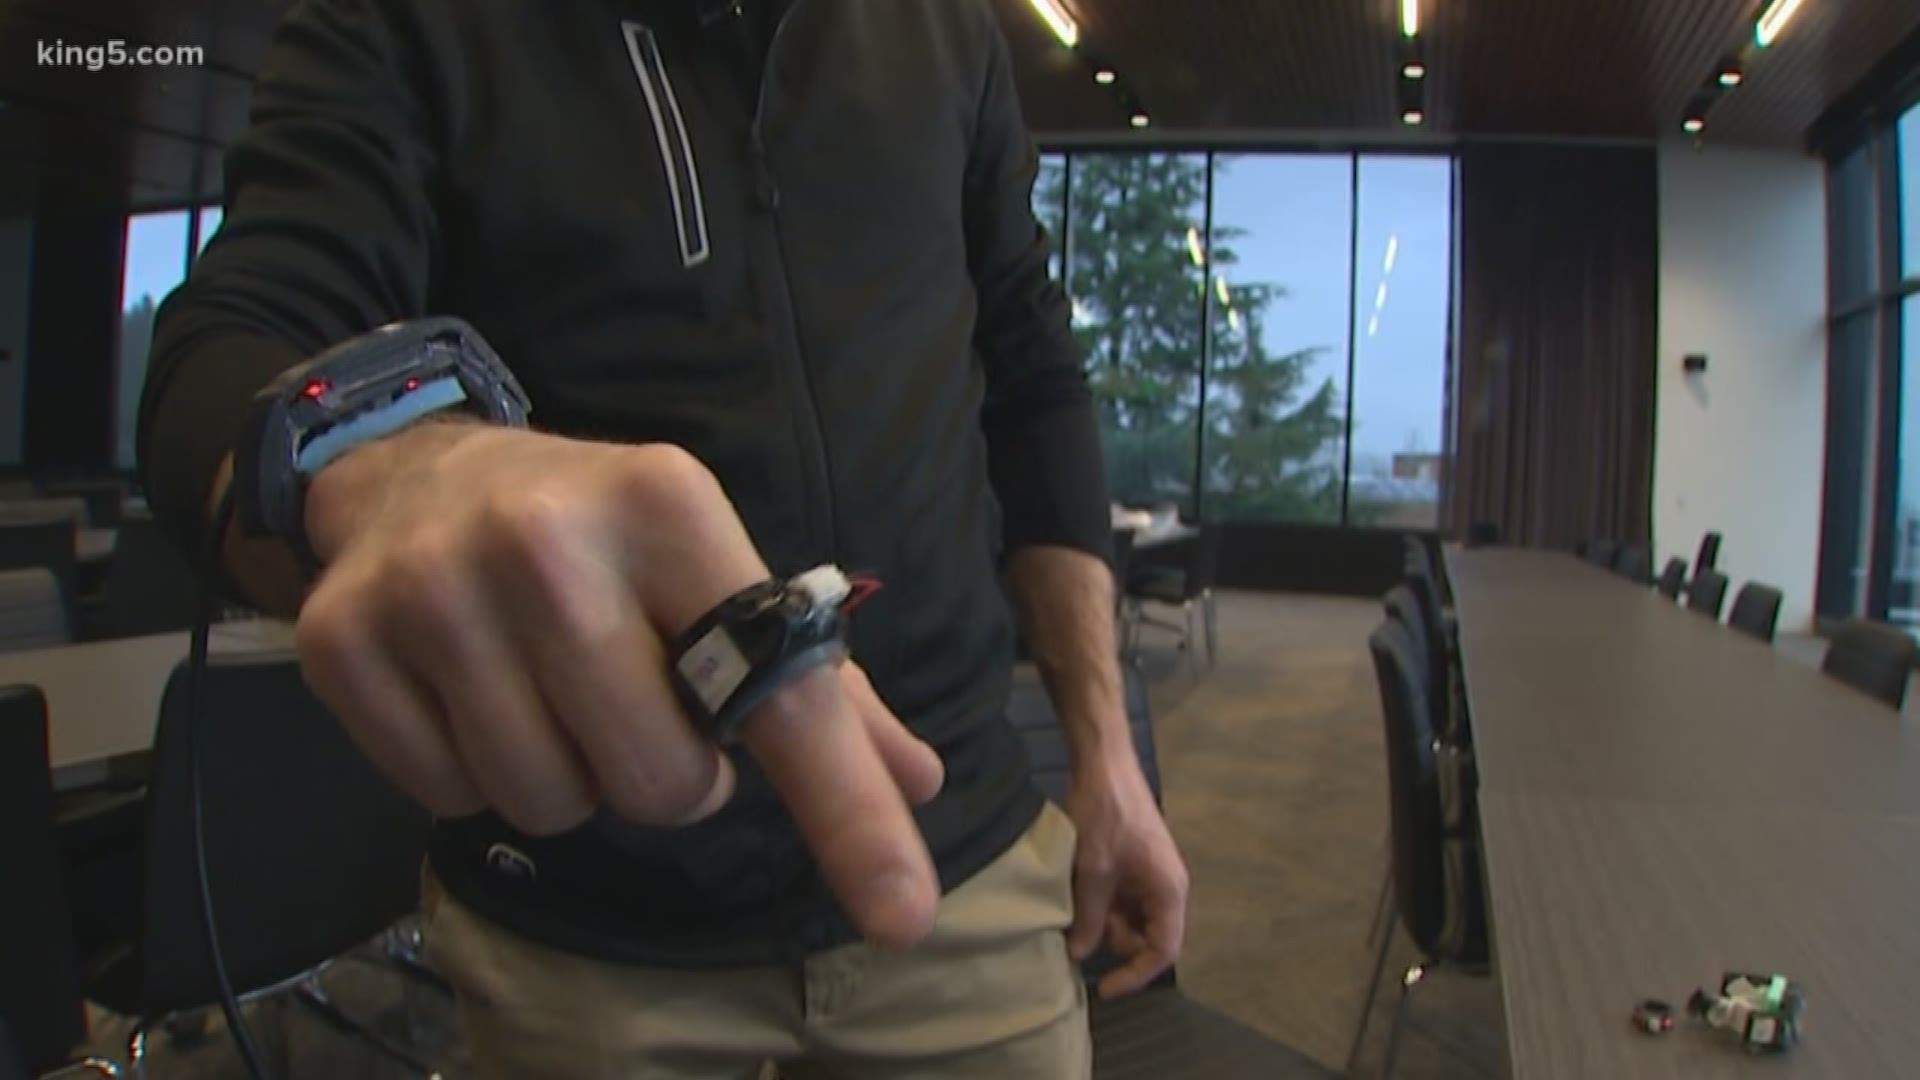 A tiny plastic ring designed at UW may be the future of wearable technology. The ring could change the way people text, play games, and browse social media.